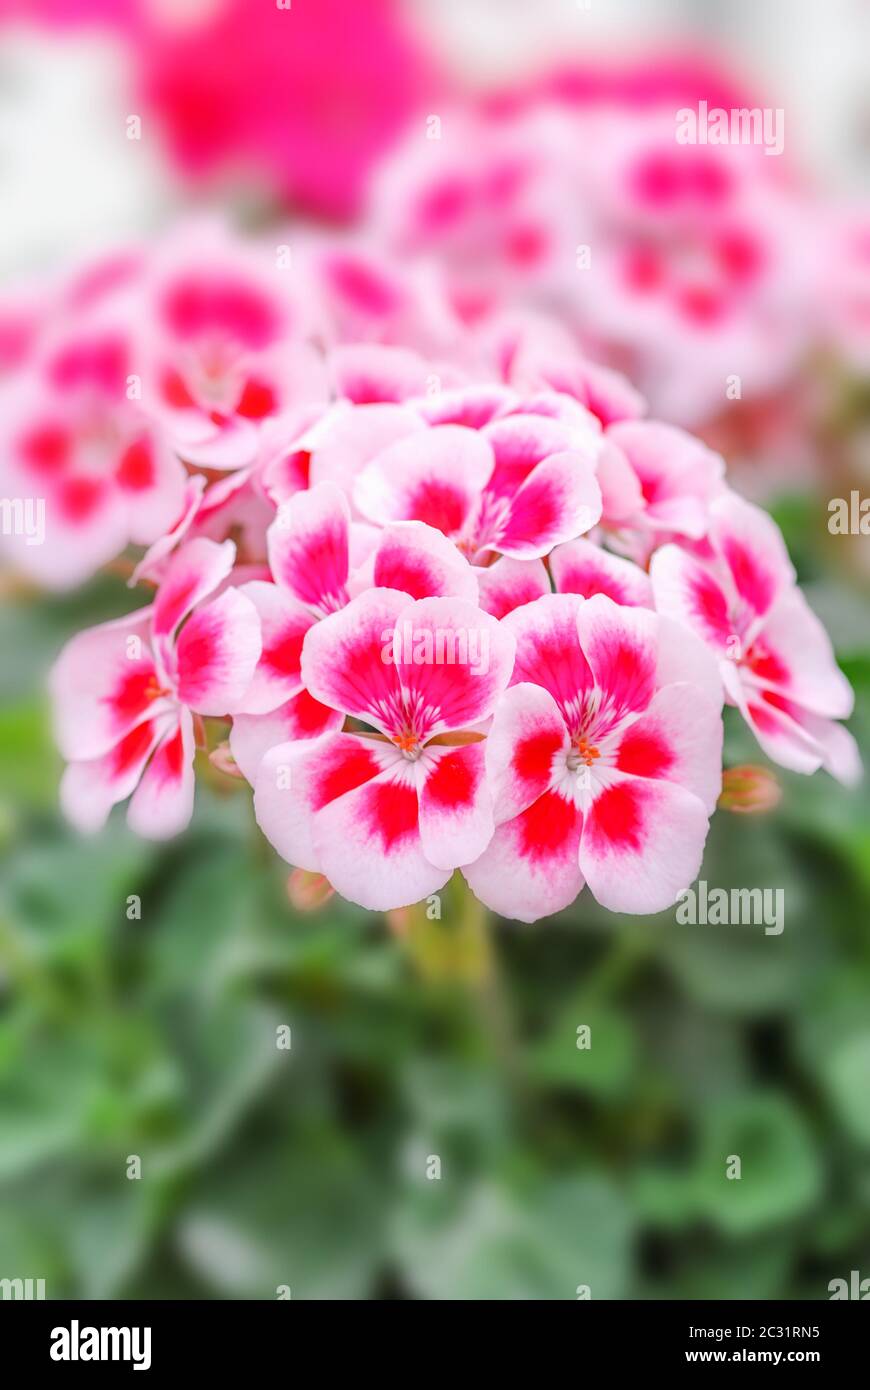 Geranium, Pelargonium plants in pot. Full bloom and ready for decorated house. Stock Photo